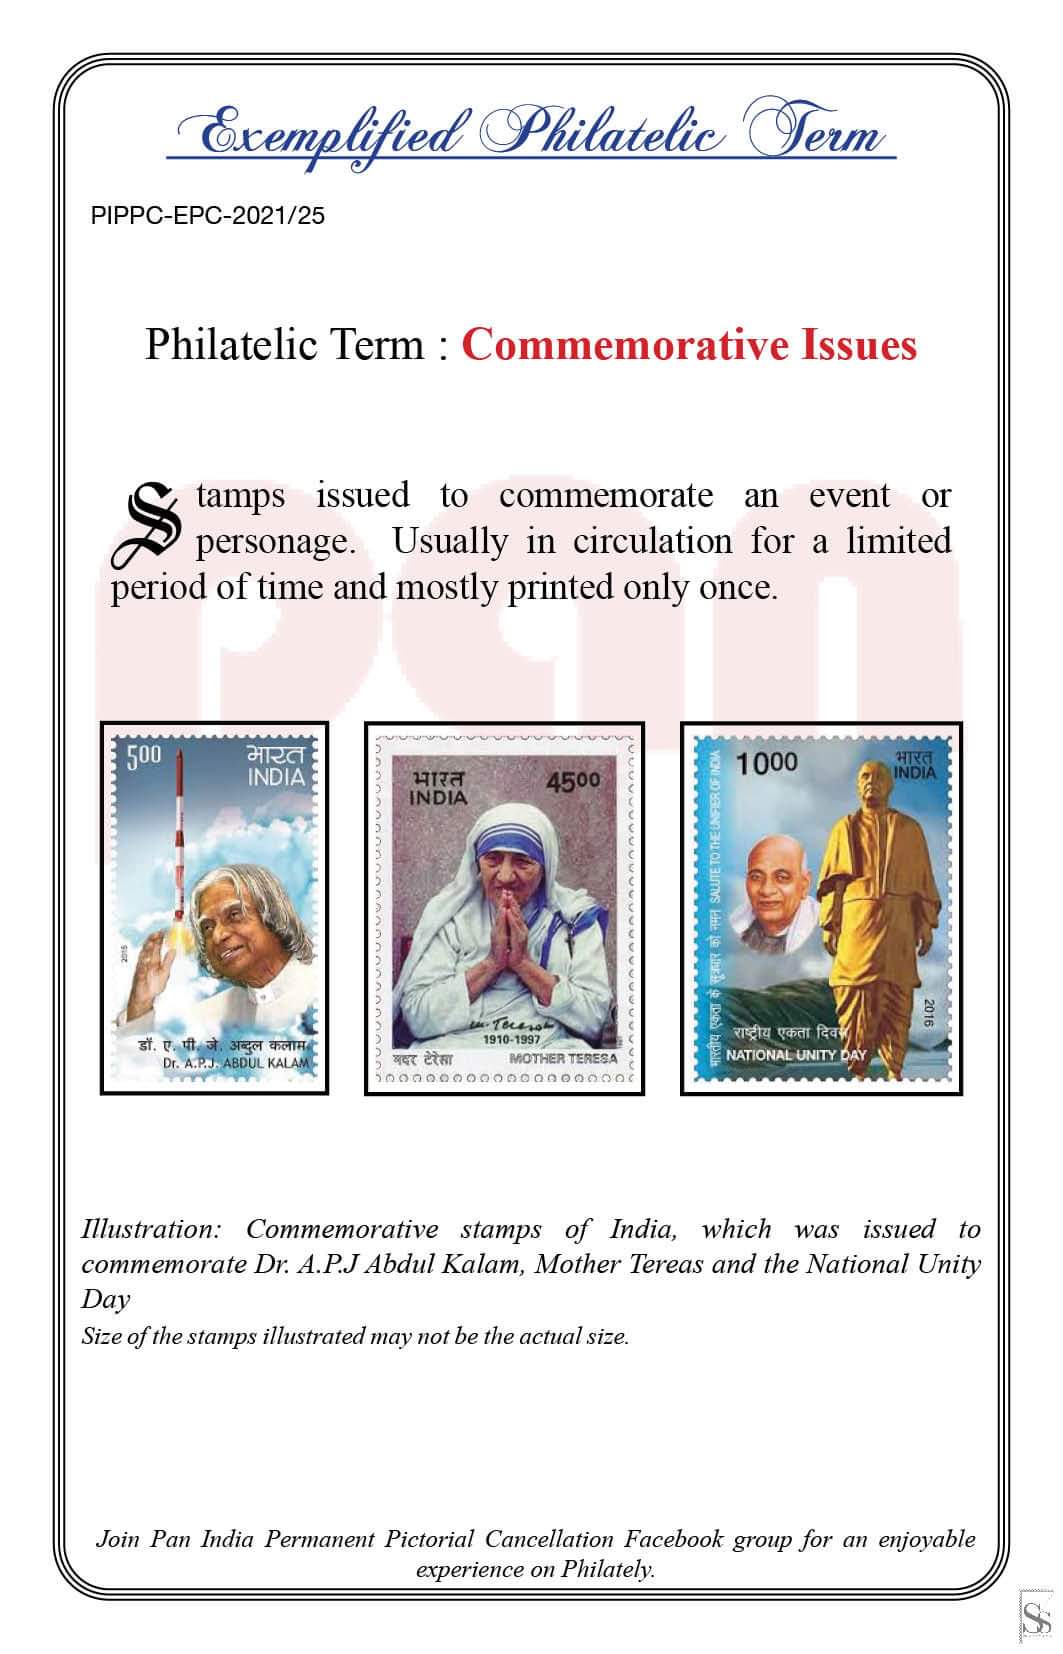 25. Today's Exemplified Philatelic term-Commemorative Issues